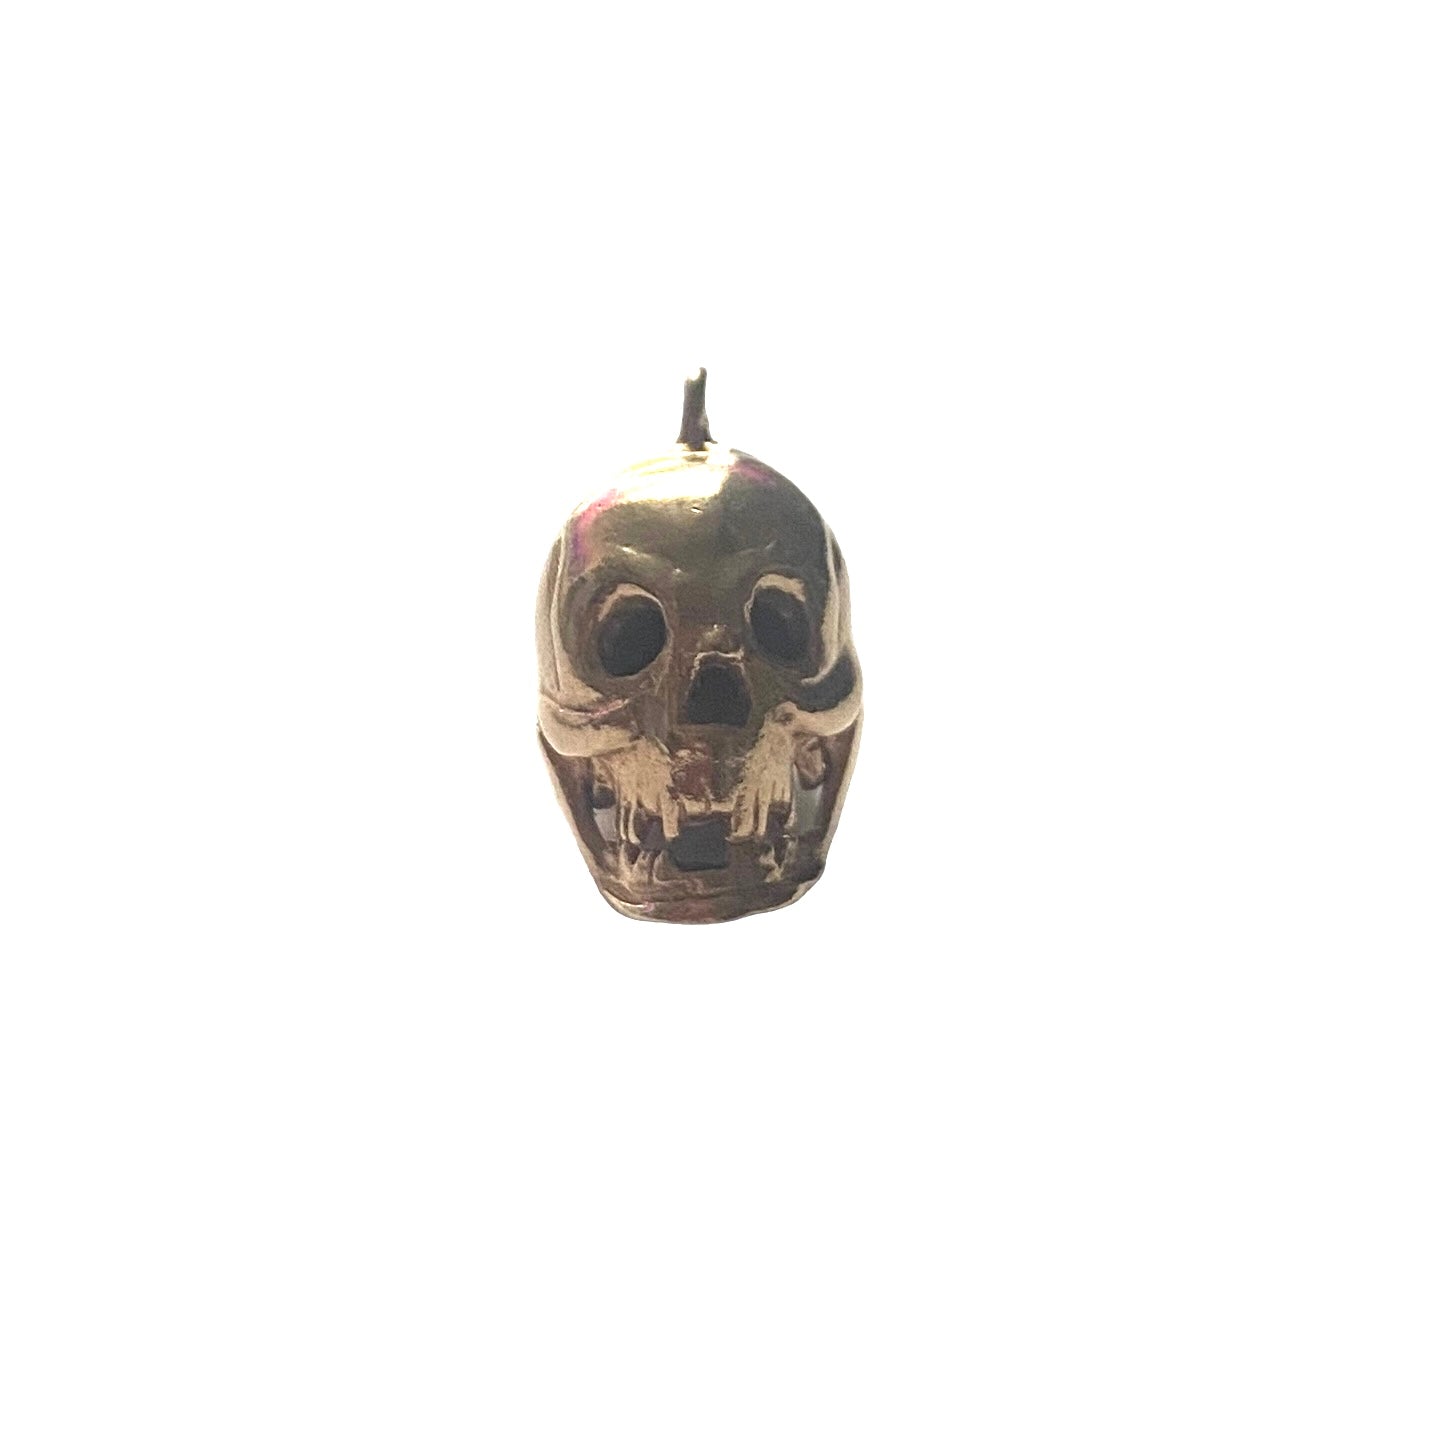 9ct vintage skull charm / pendant with articulated mouth